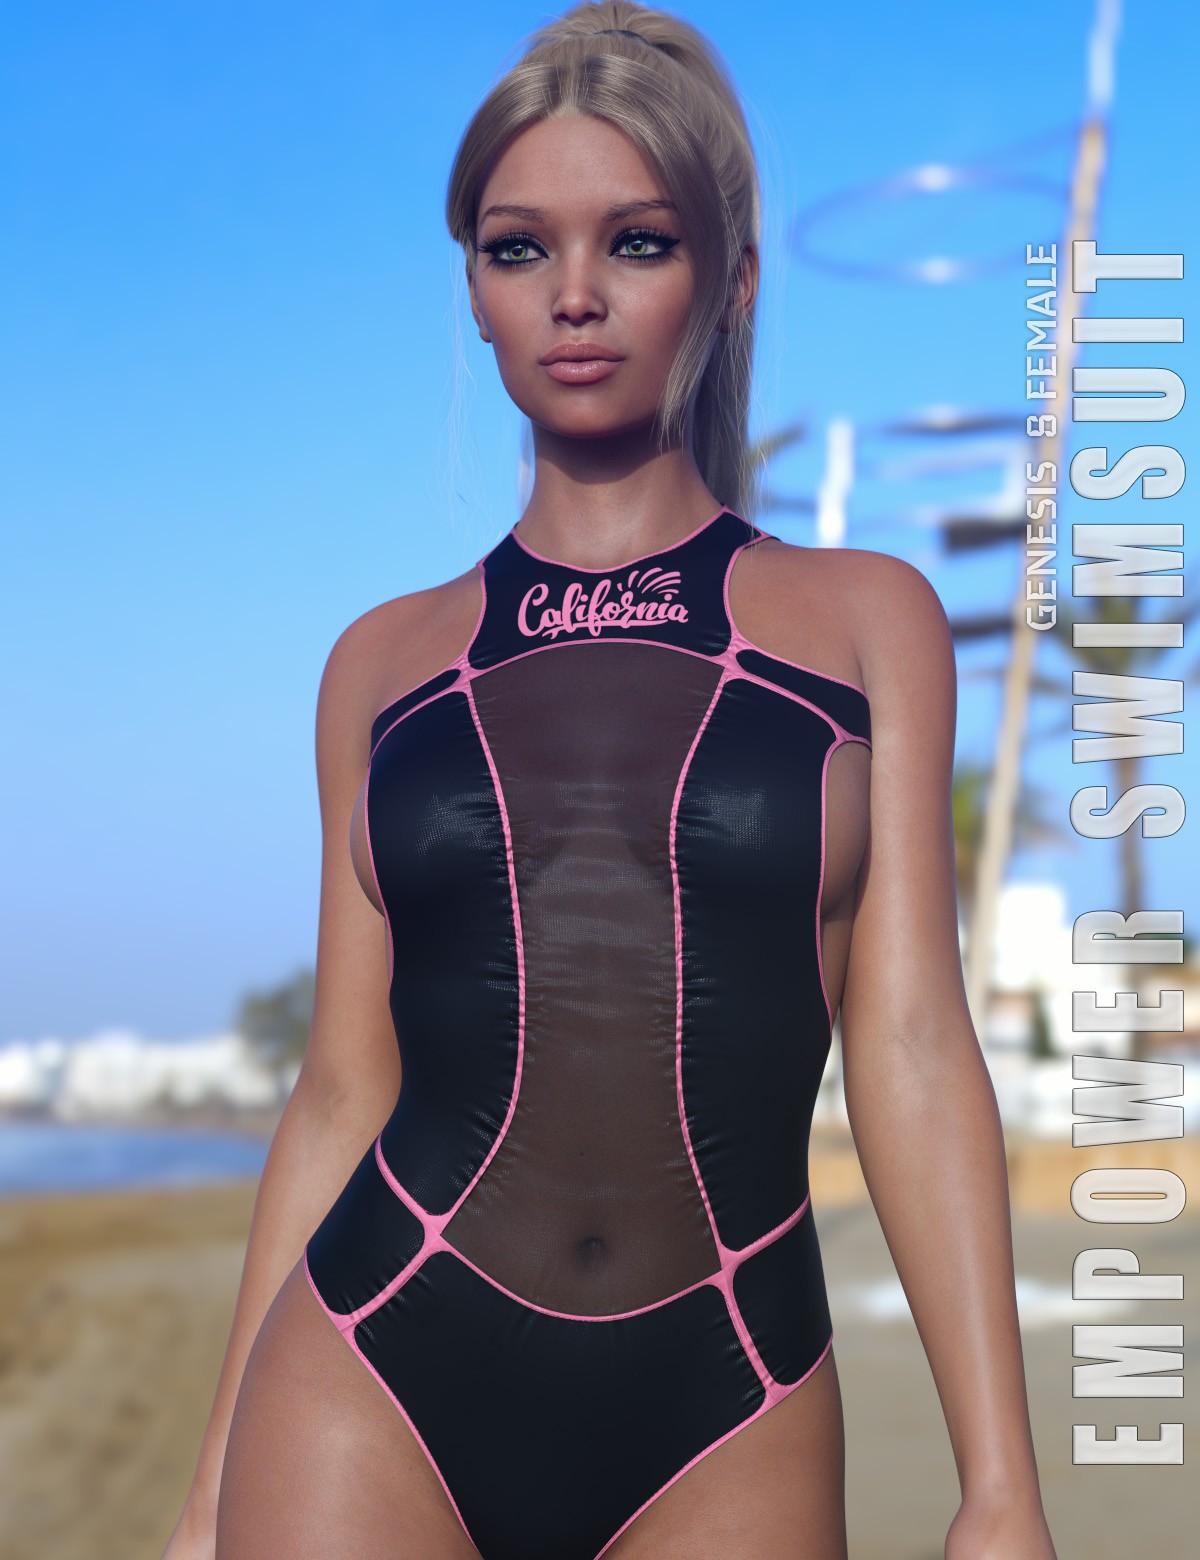 dForce Empower Swimsuit for Genesis 8 and 8.1F